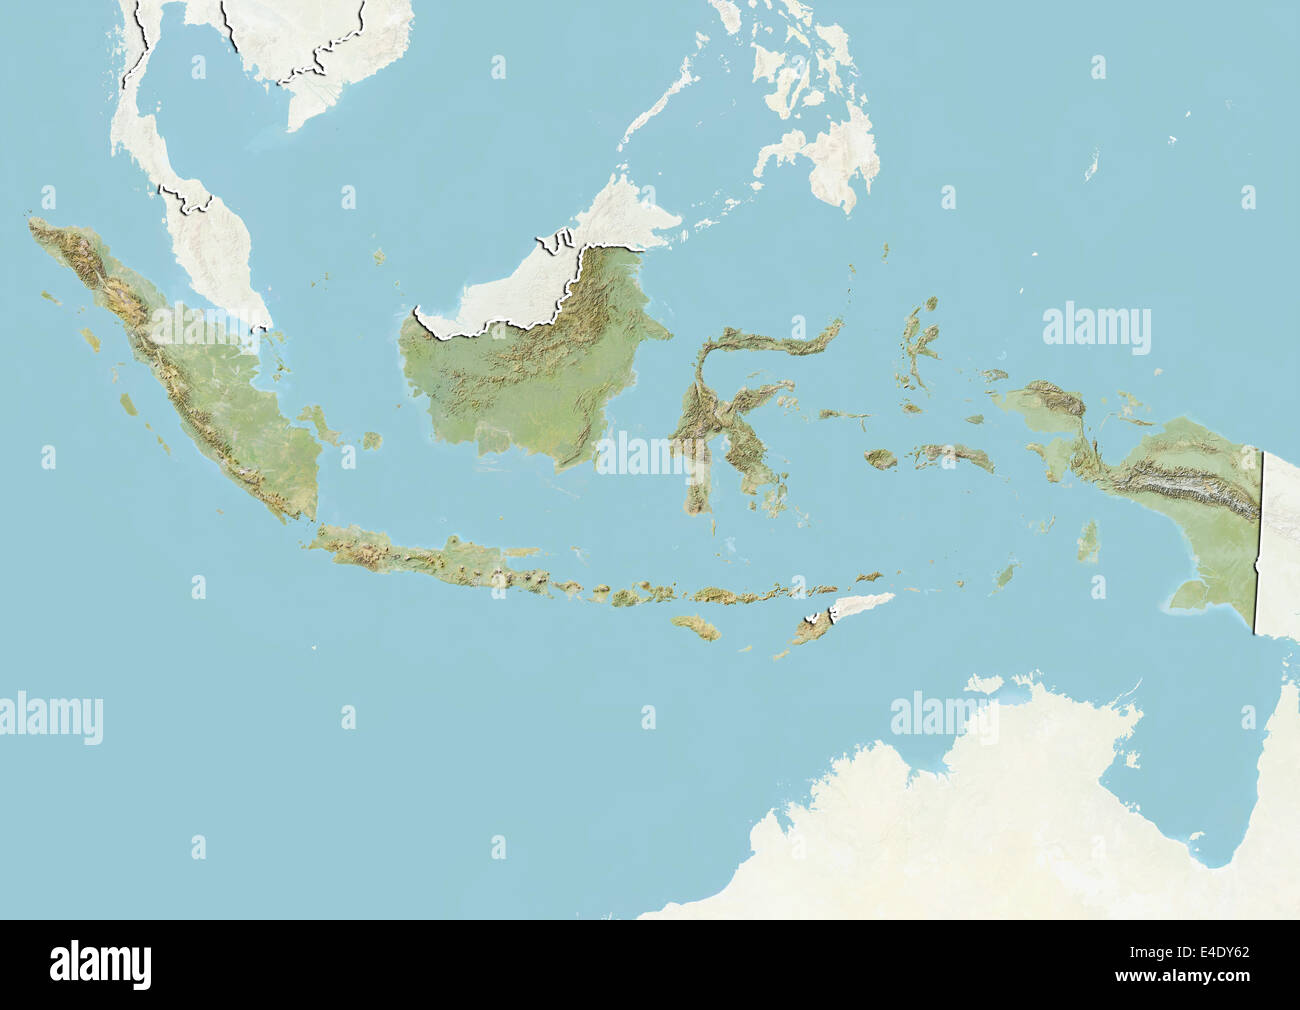 Indonesia, Relief Map With Border and Mask Stock Photo